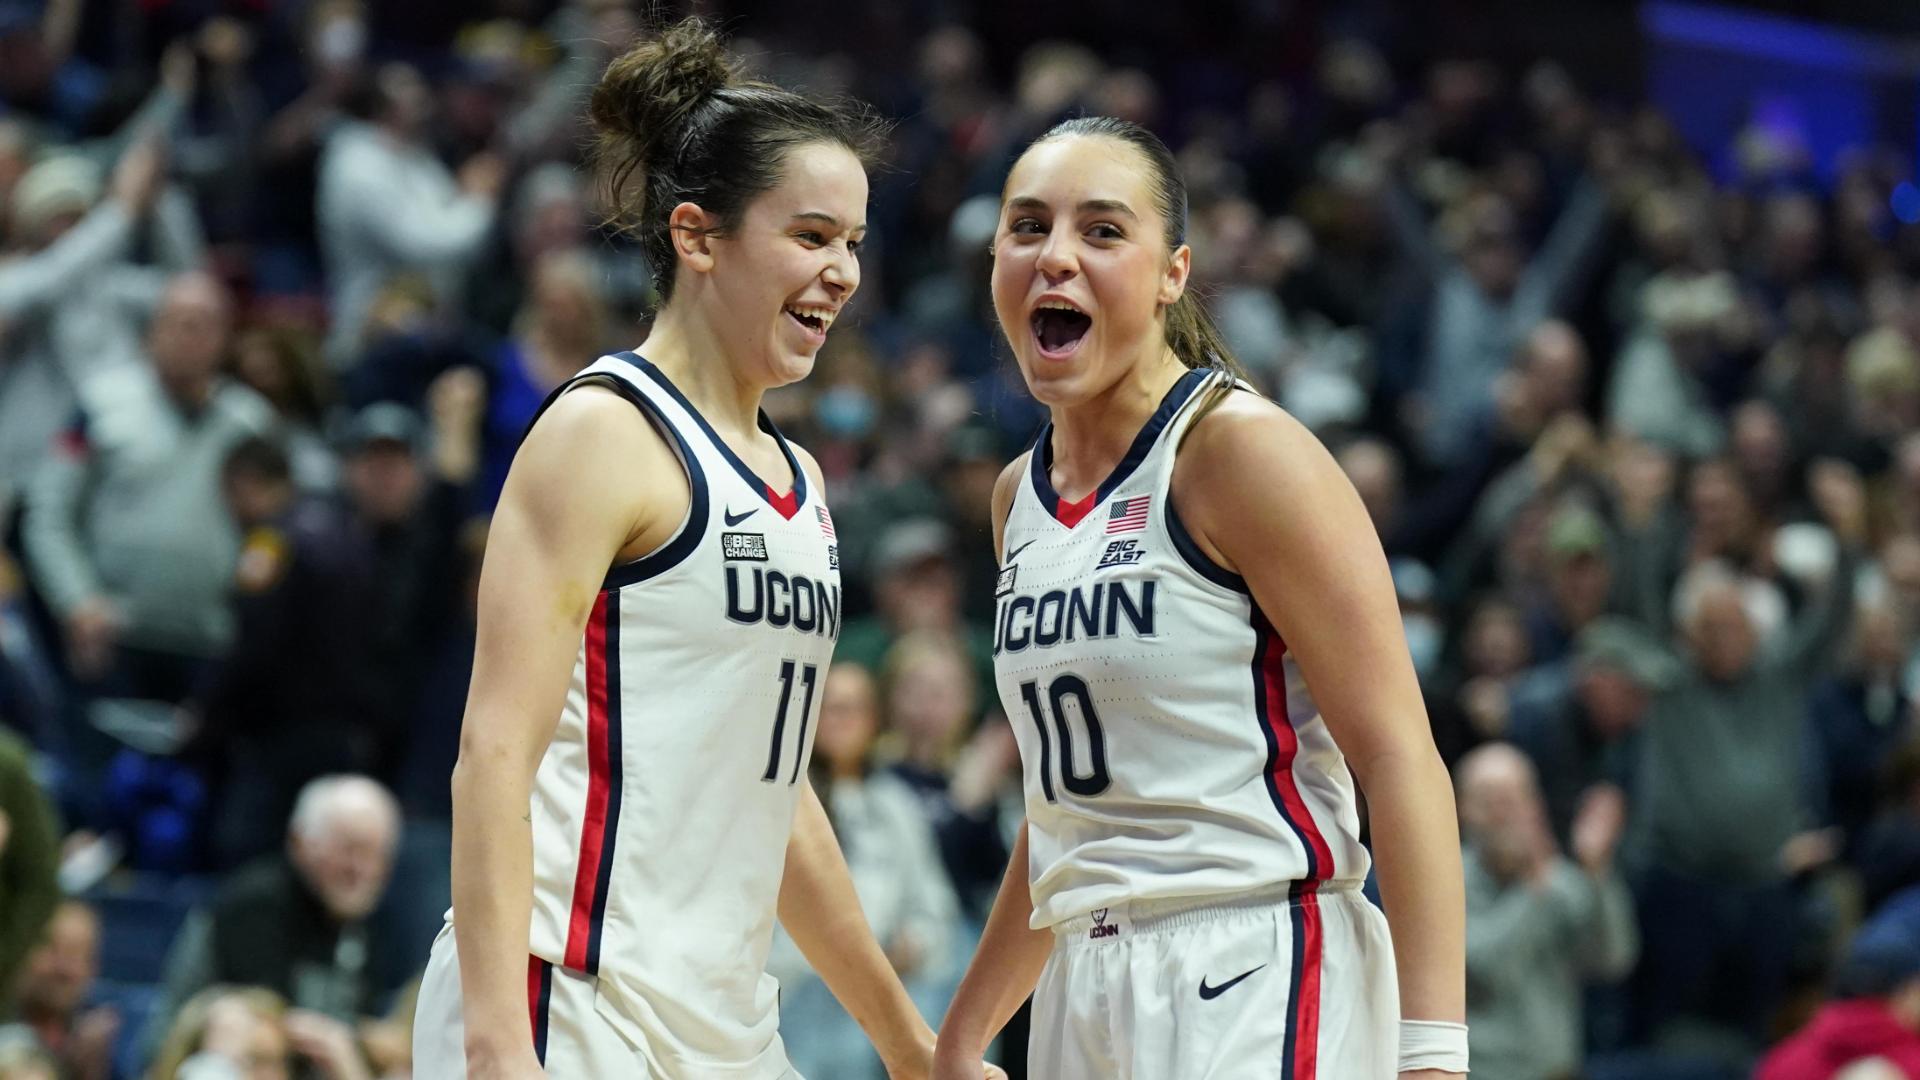 UConn hangs on late to survive upset scare vs